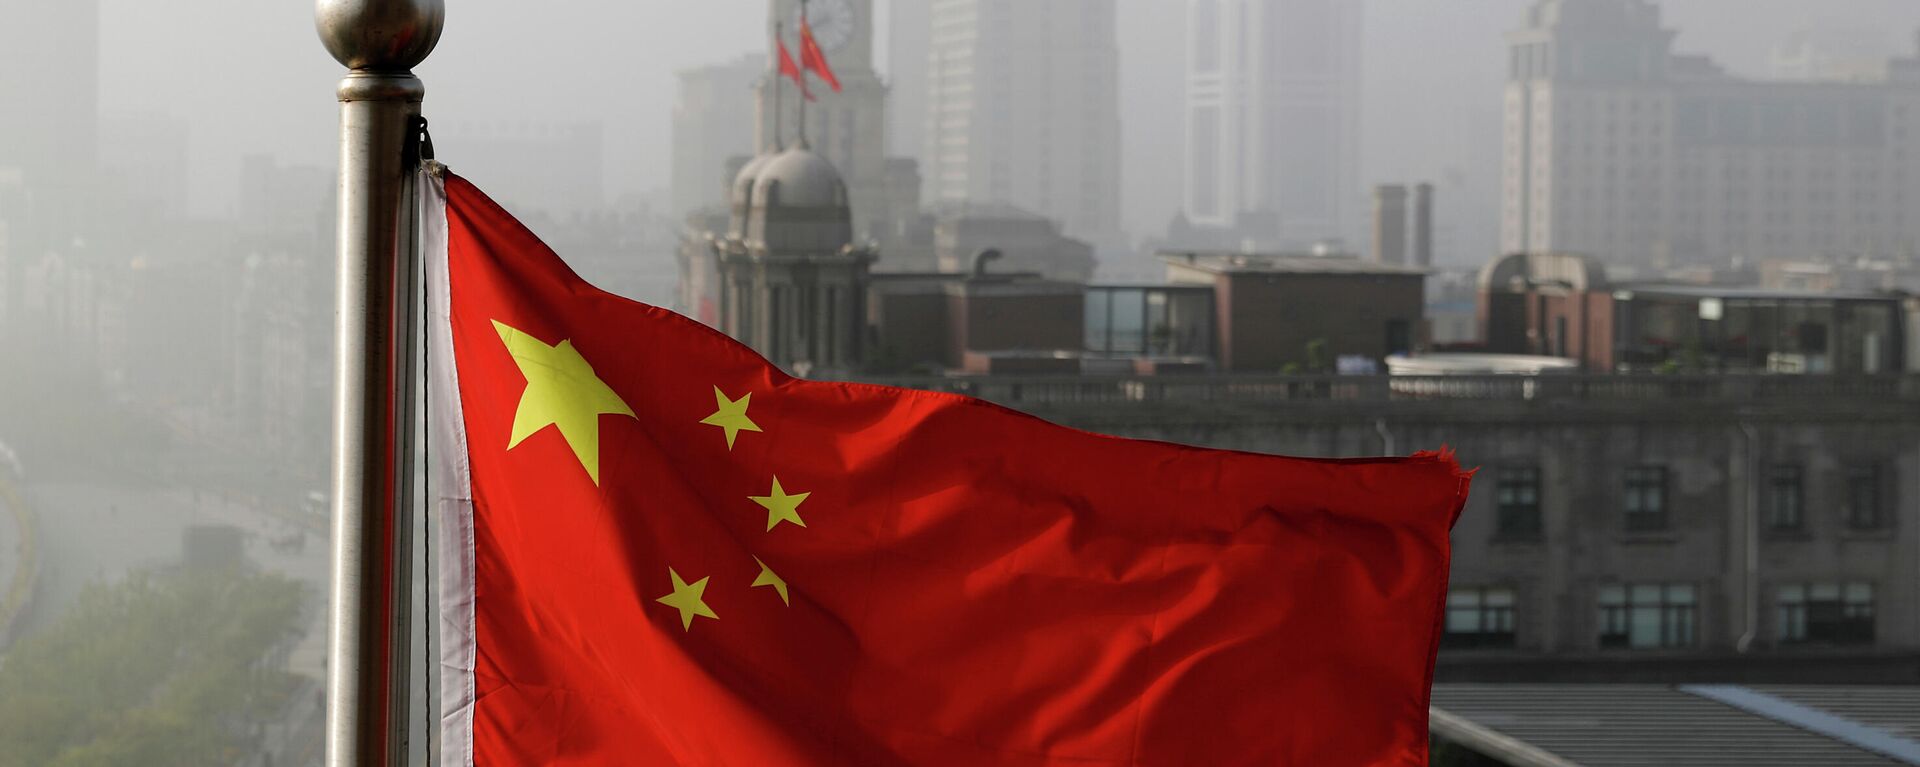 FILE - In this April 14, 2016 file photo, a Chinese national flag flutters against the office buildings in Shanghai, China - Sputnik International, 1920, 07.03.2022